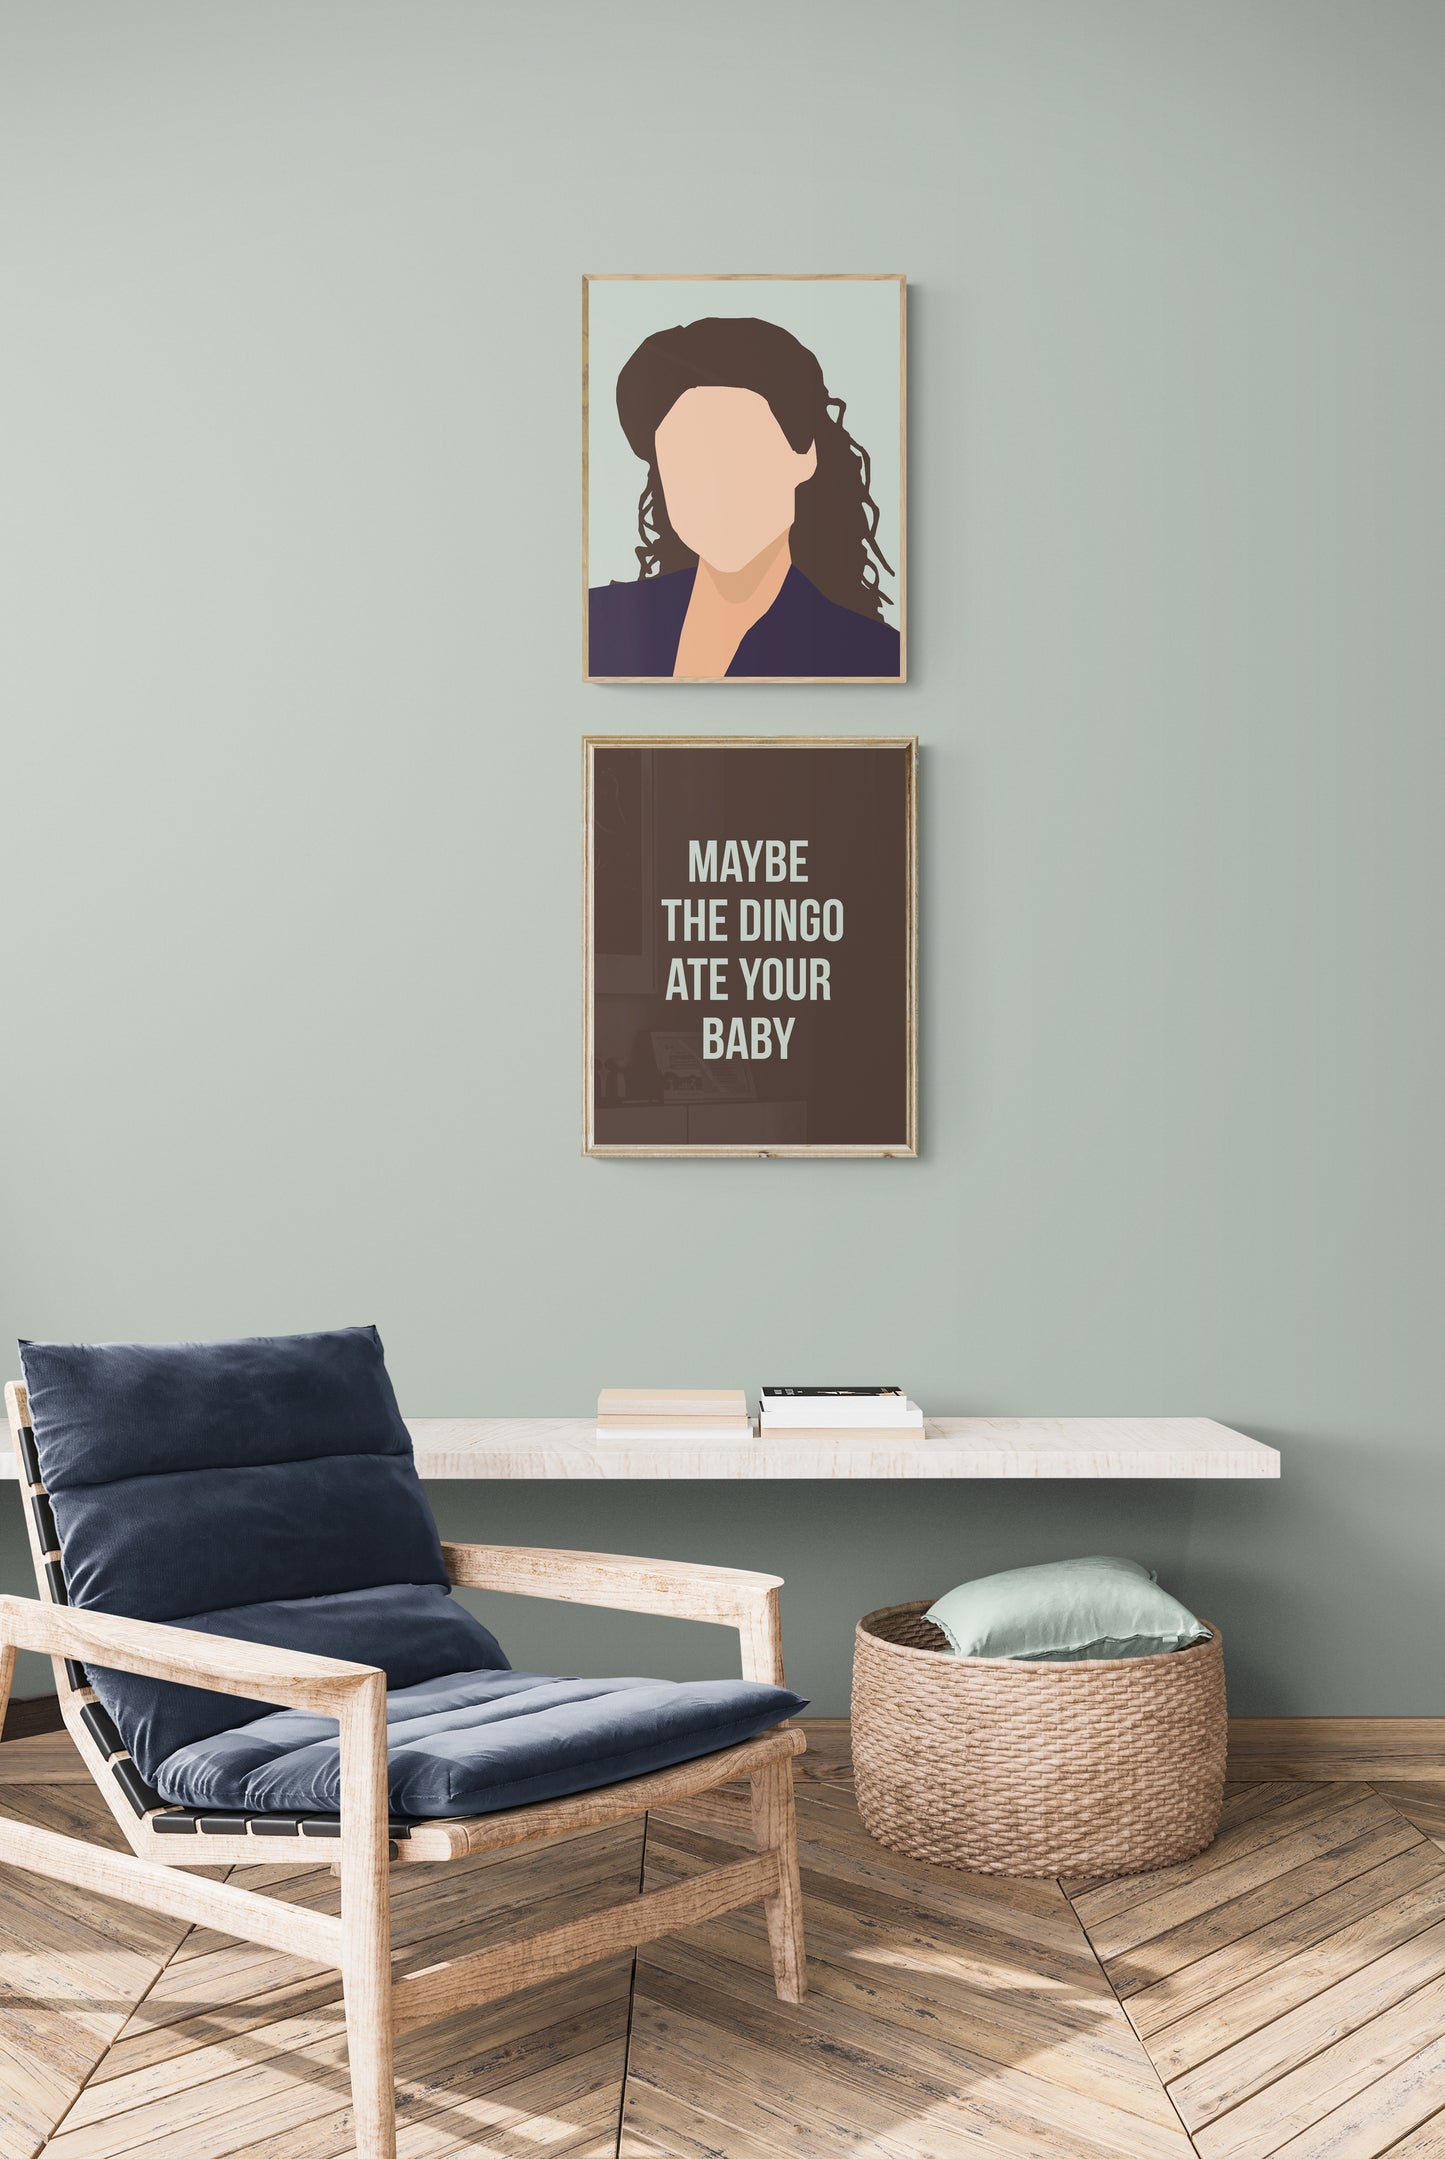 Elaine Benes art print with quote "maybe the dingo ate your baby" set